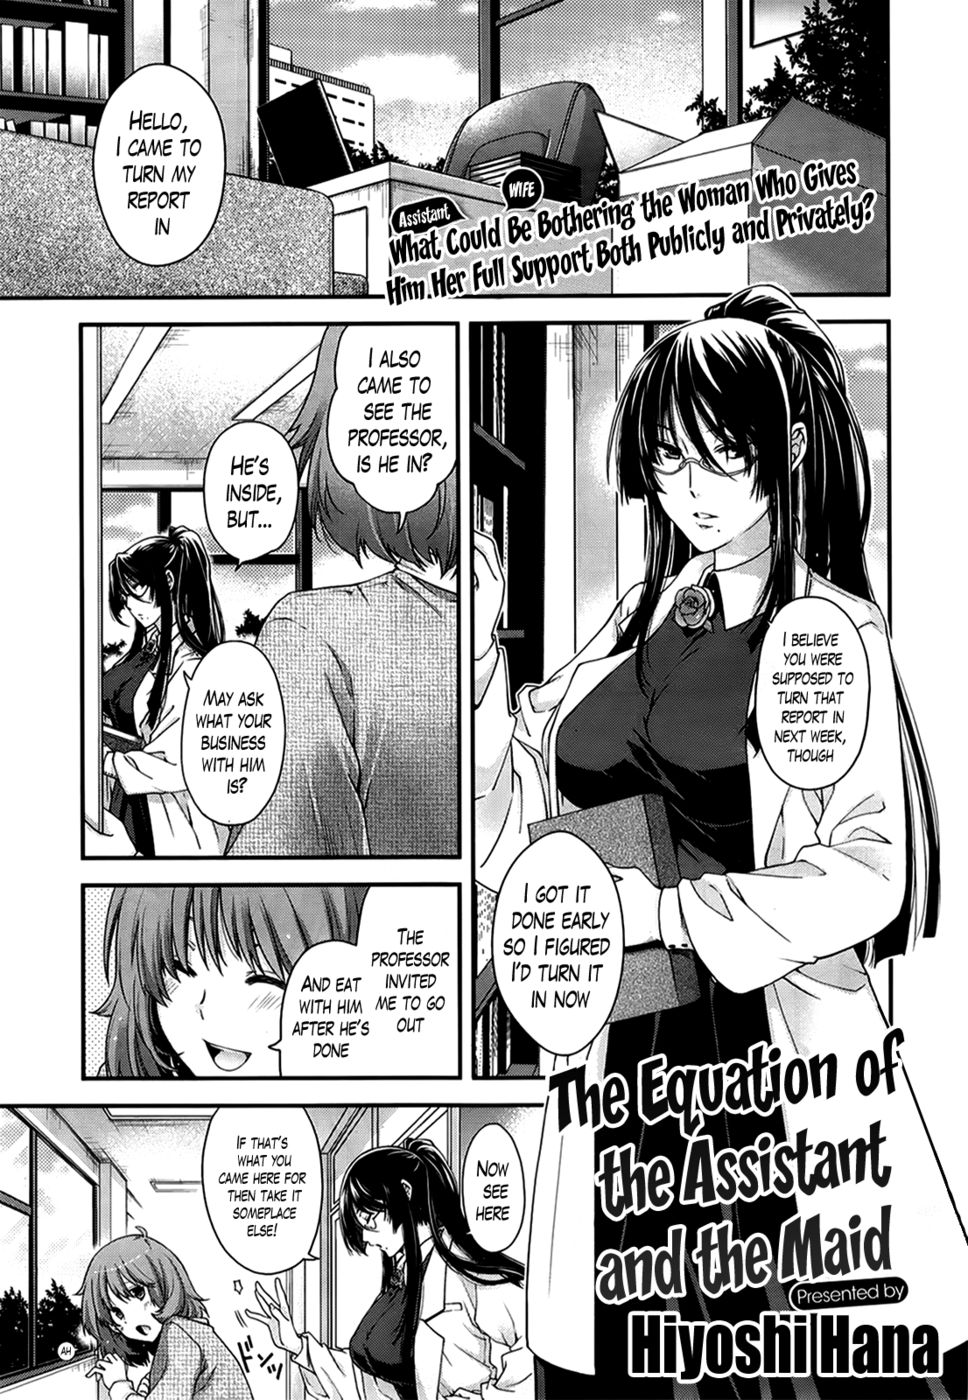 Hentai Manga Comic-The Equation of the Maid and the Assistant-Read-1